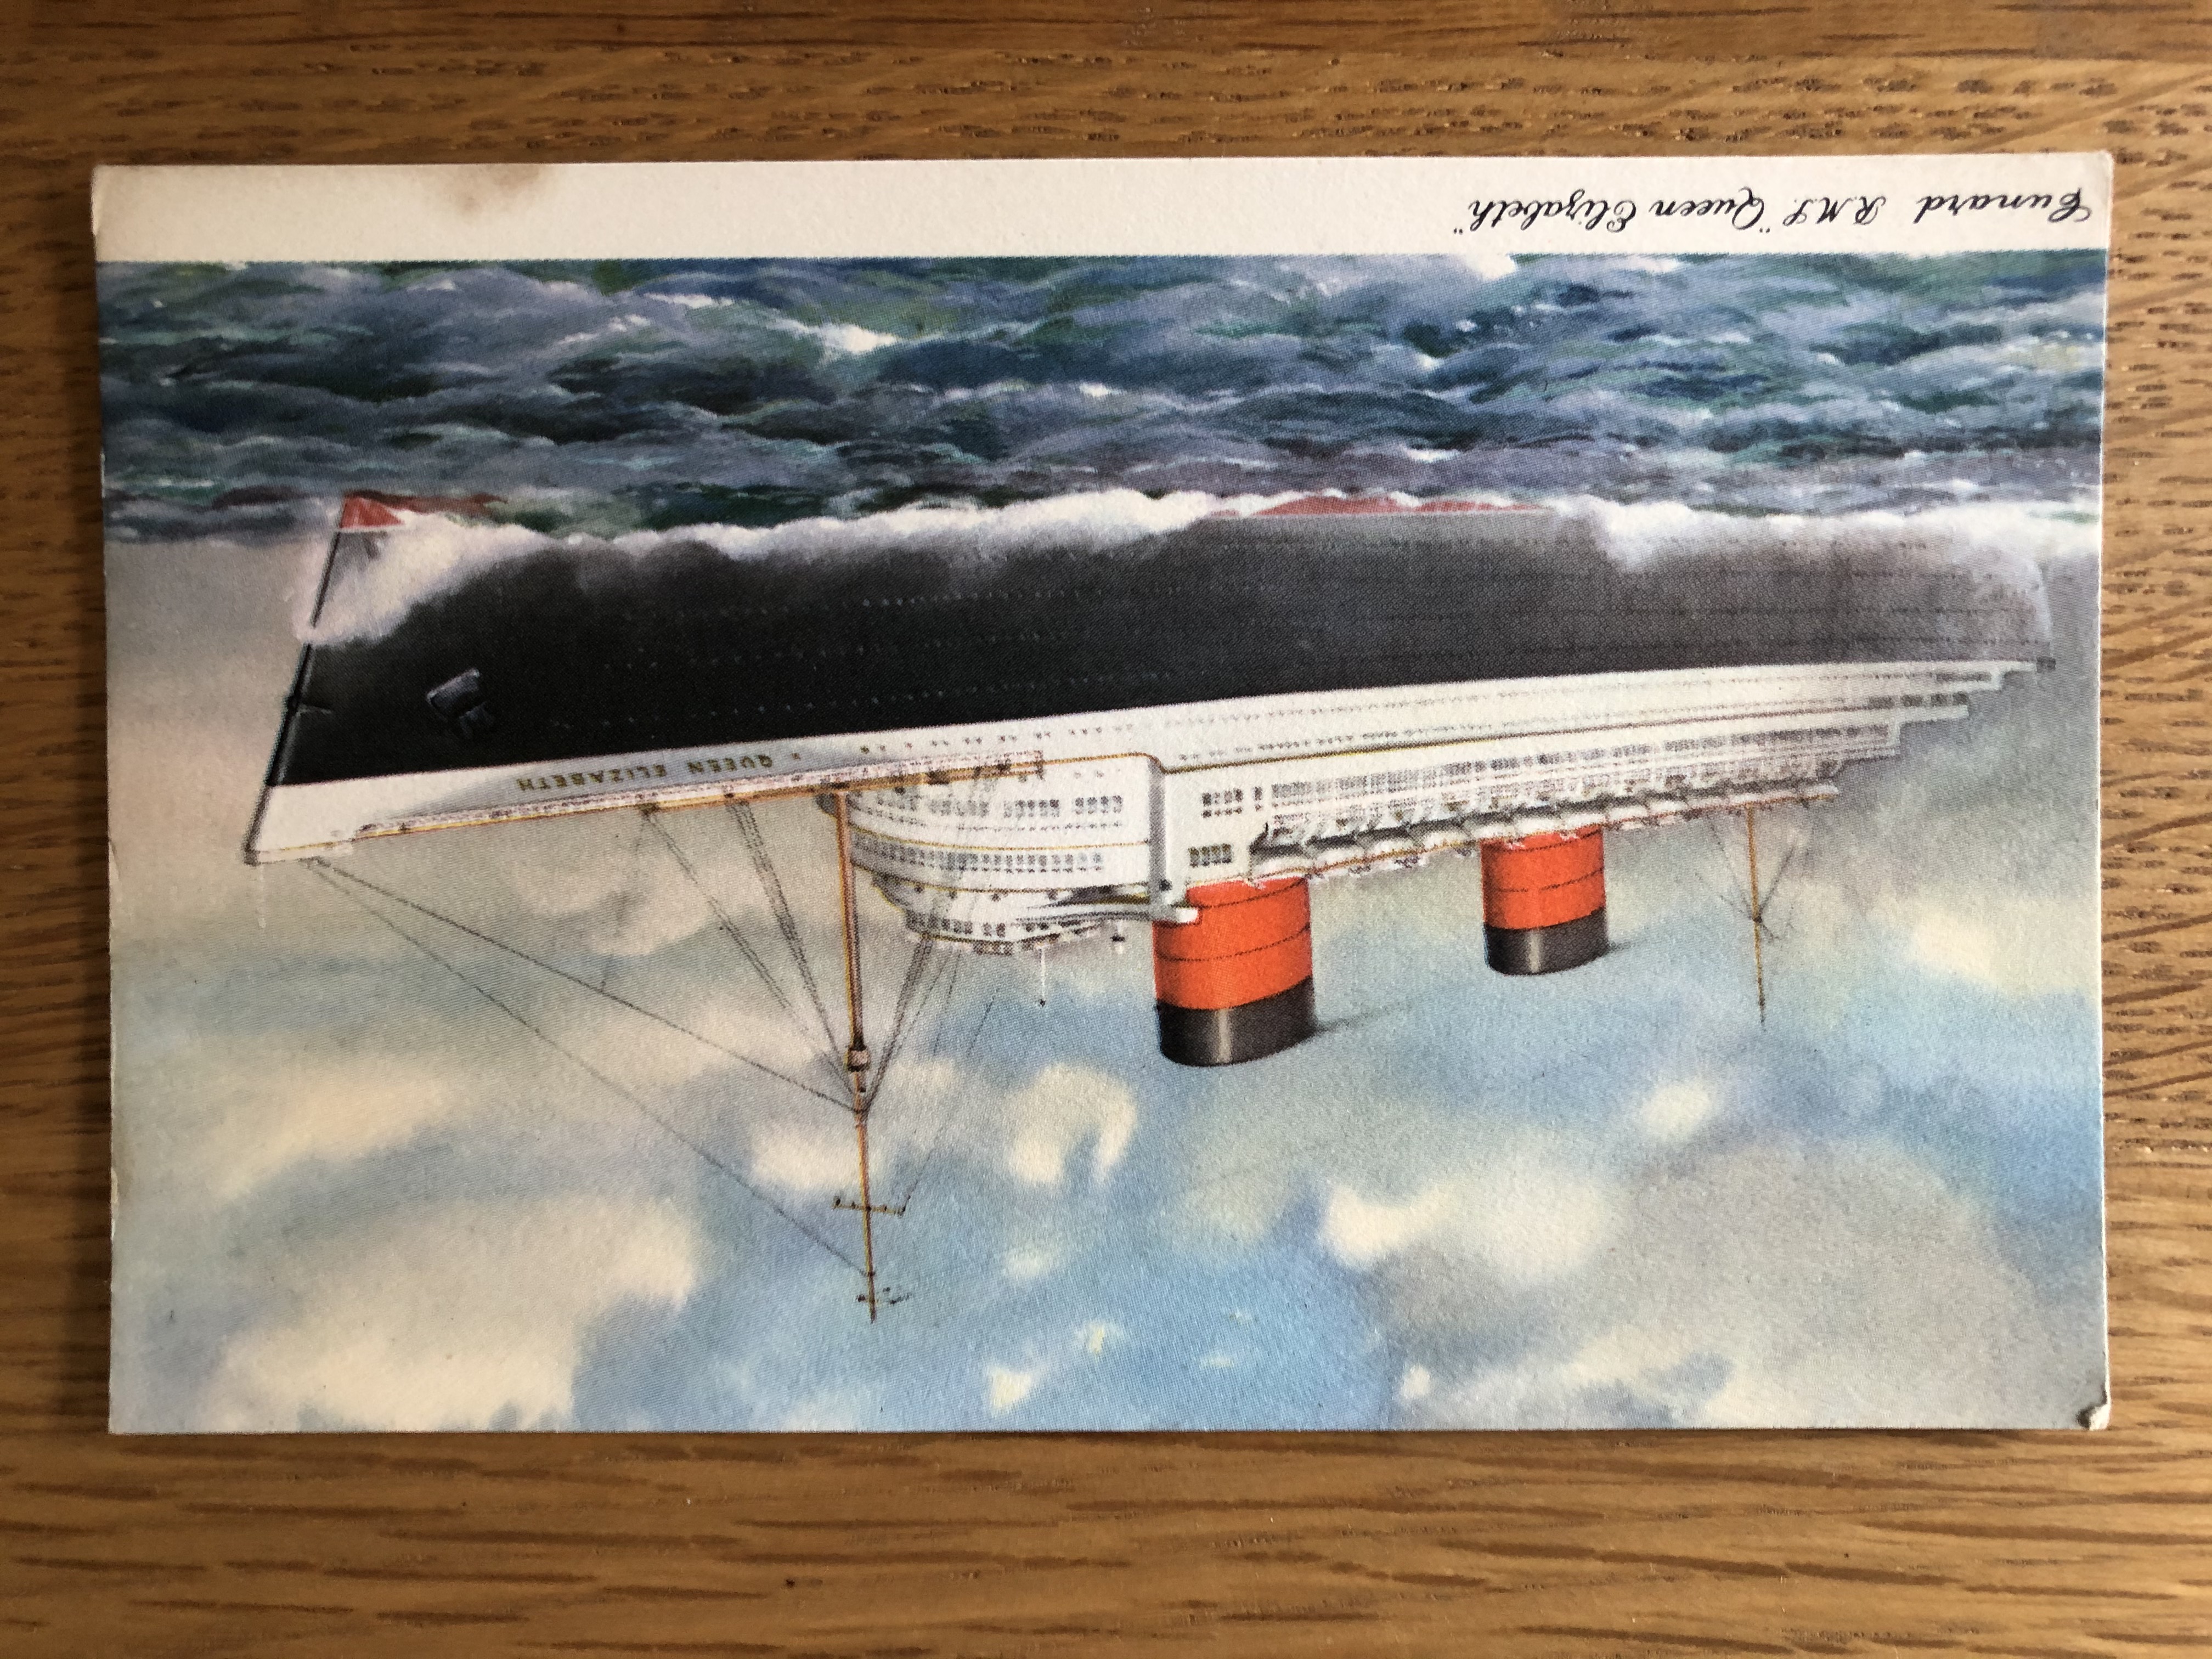 POSTCARD FROM THE CUNARD LINE VESSEL THE RMS QUEEN ELIZABETH